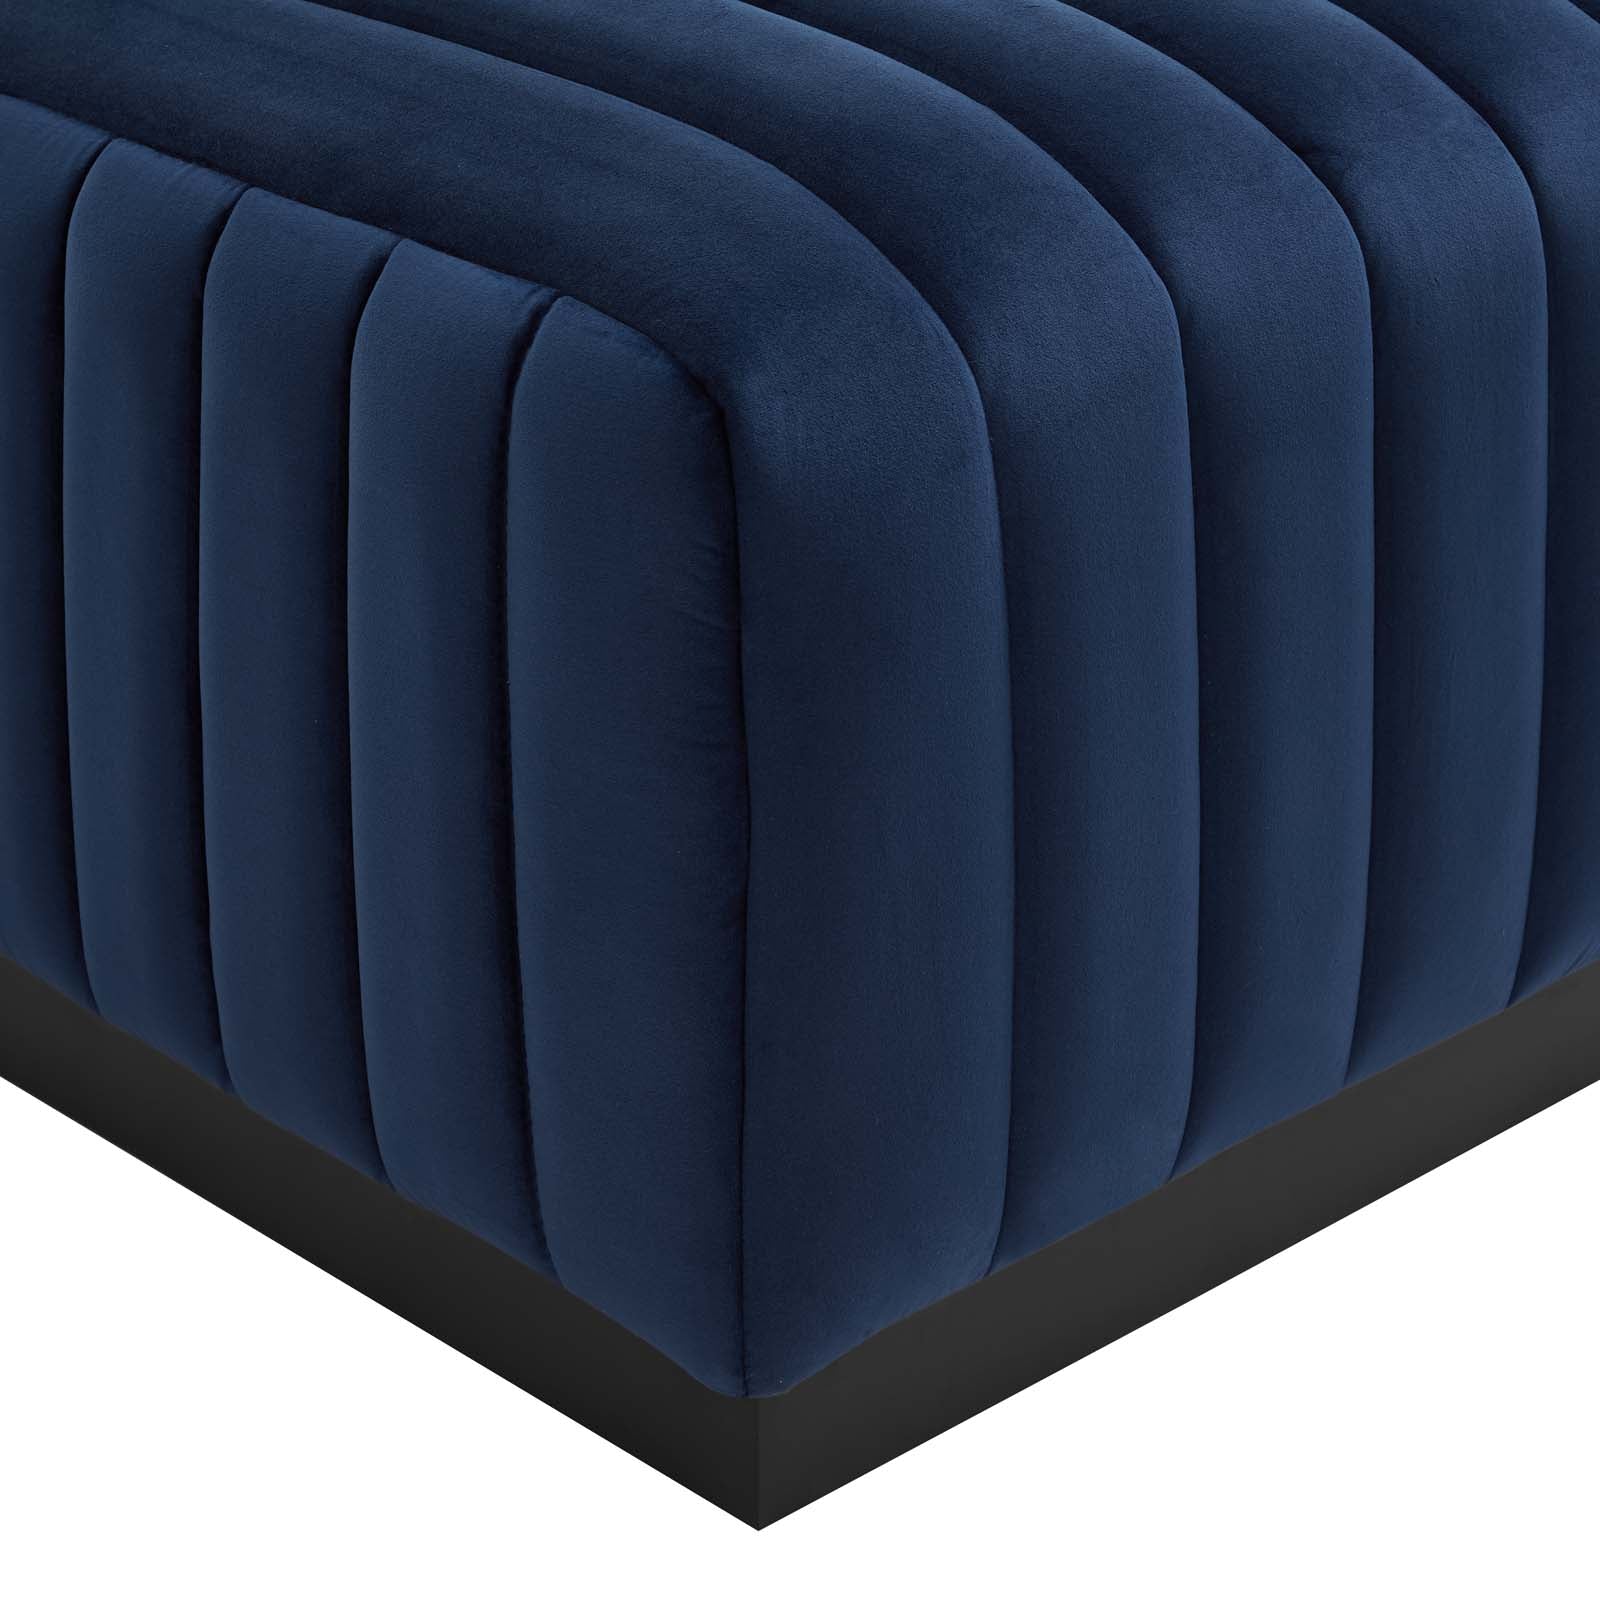 Modway Sectional Sofas - Conjure Channel Tufted Performance Velvet 5-Piece Sectional Black Midnight Blue